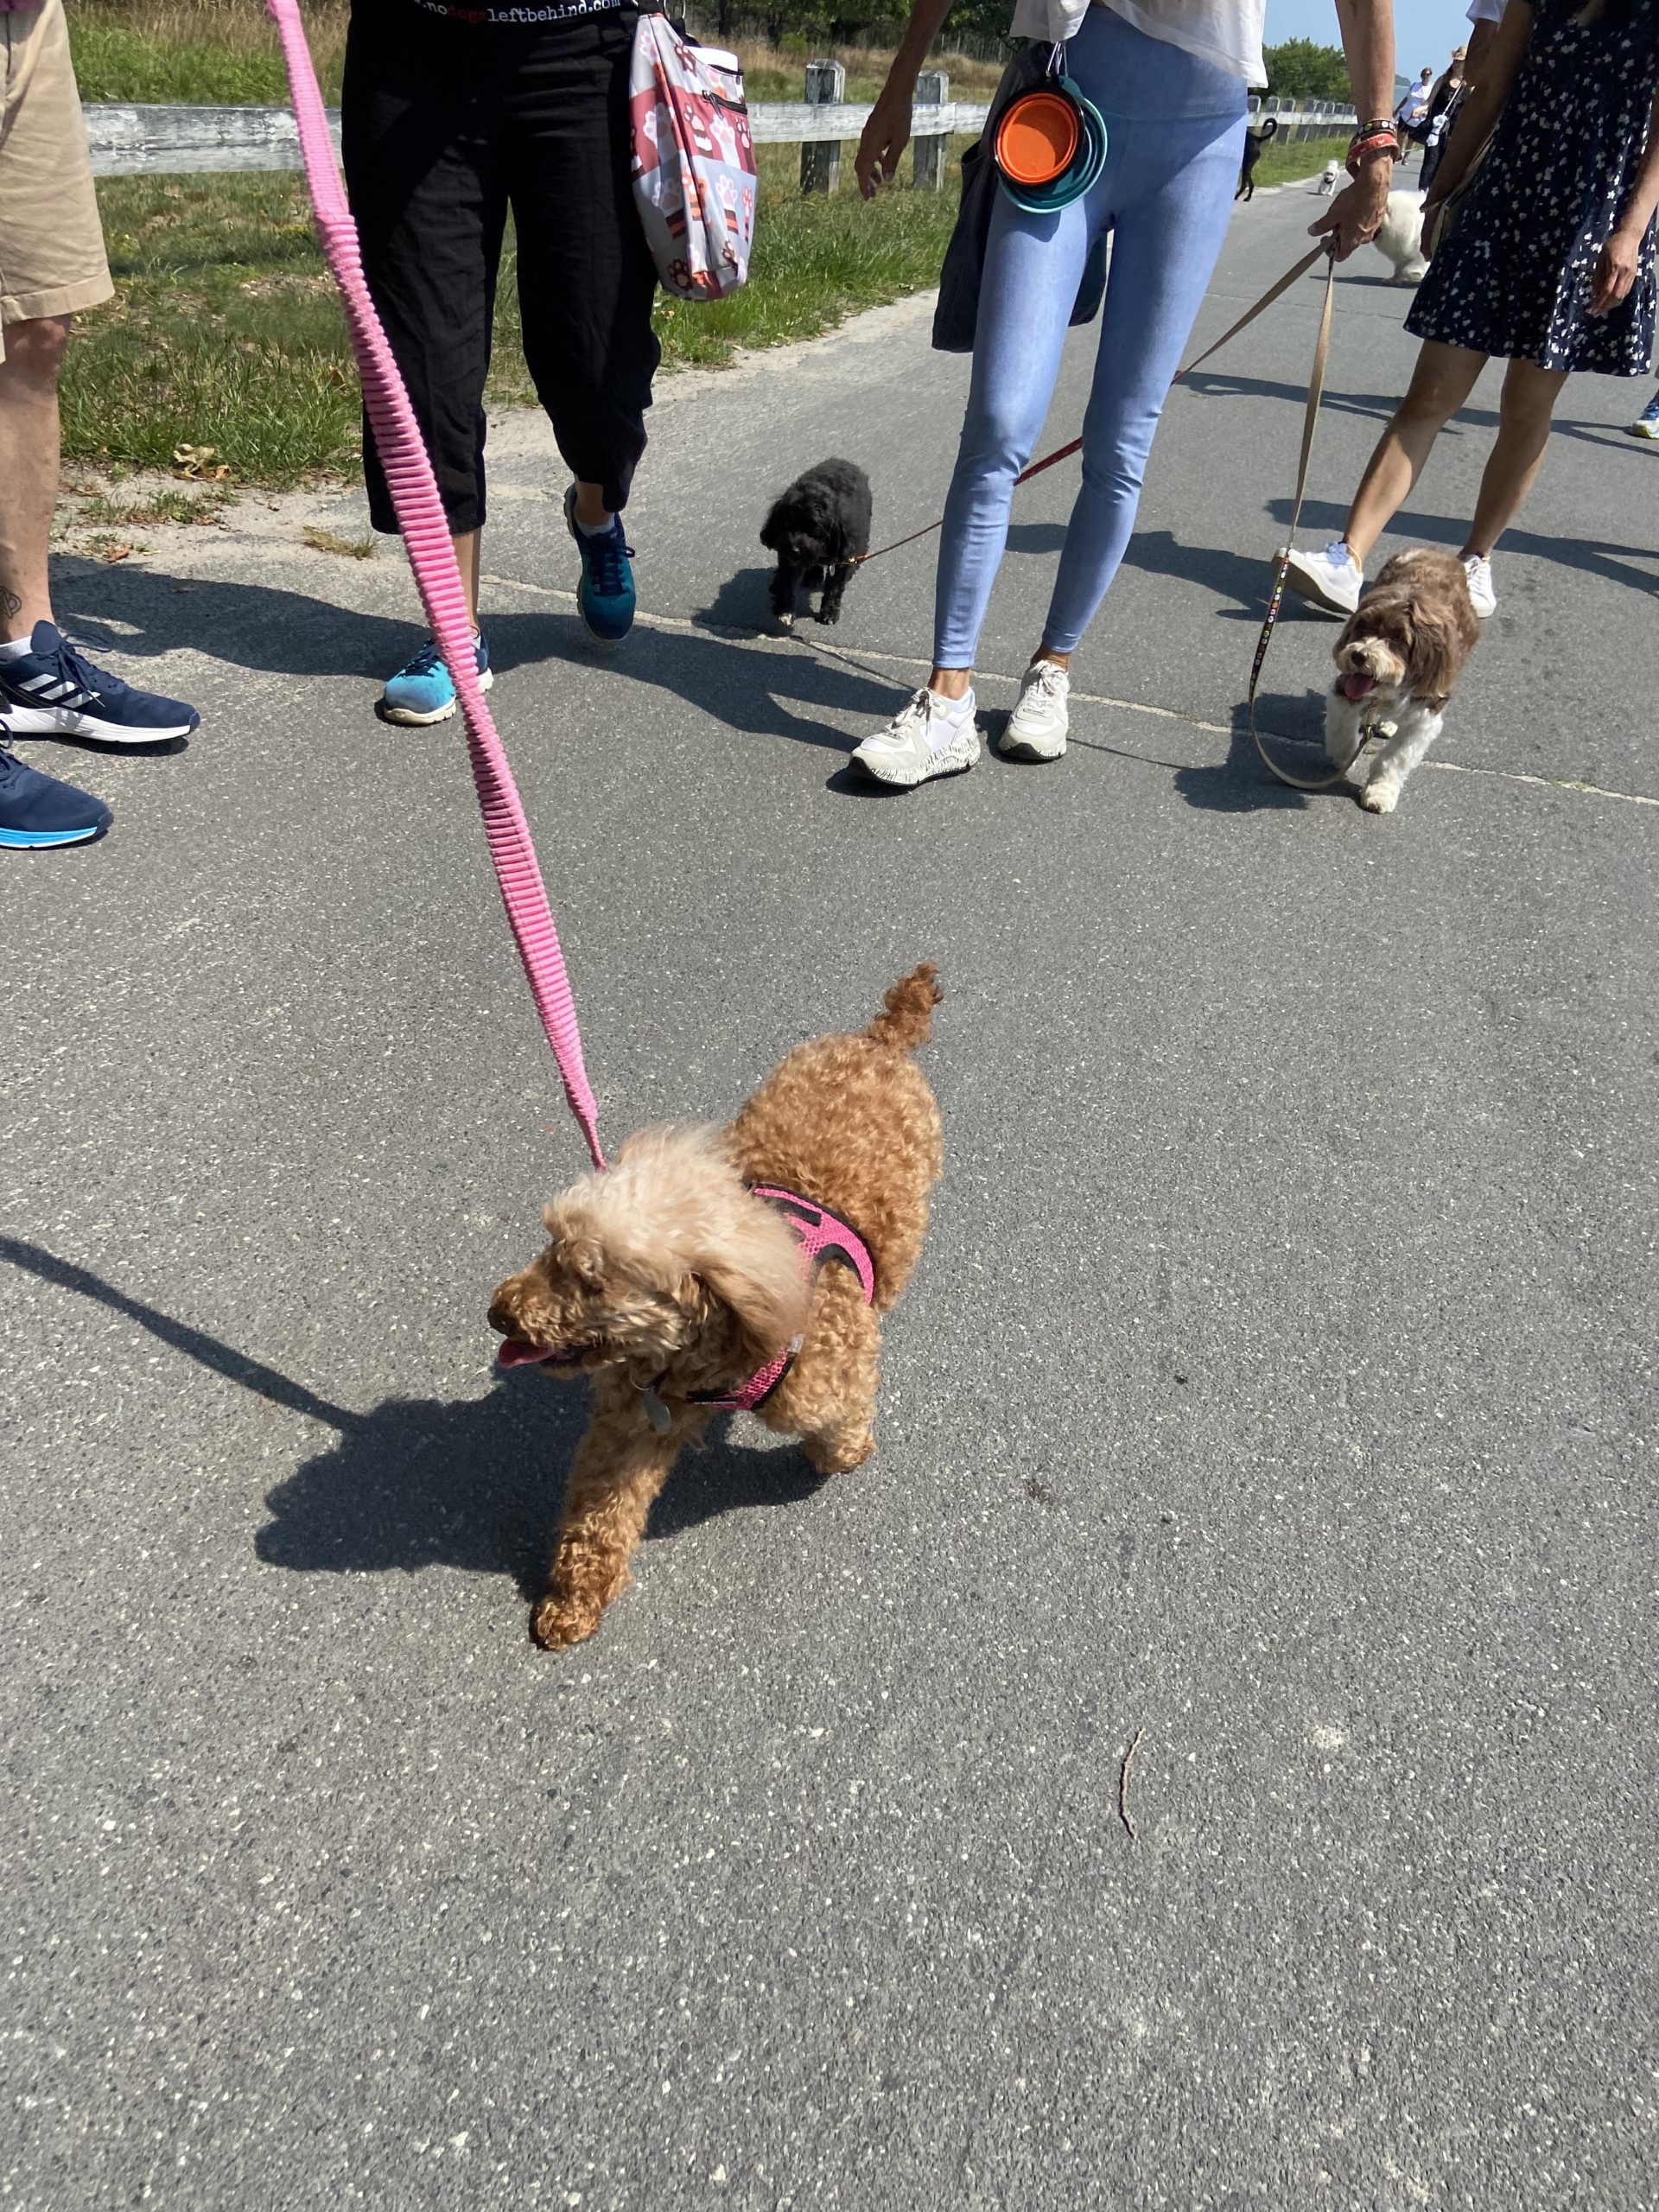 Tulip, who was rescued from China by No Dogs Left Behind, joins the walk